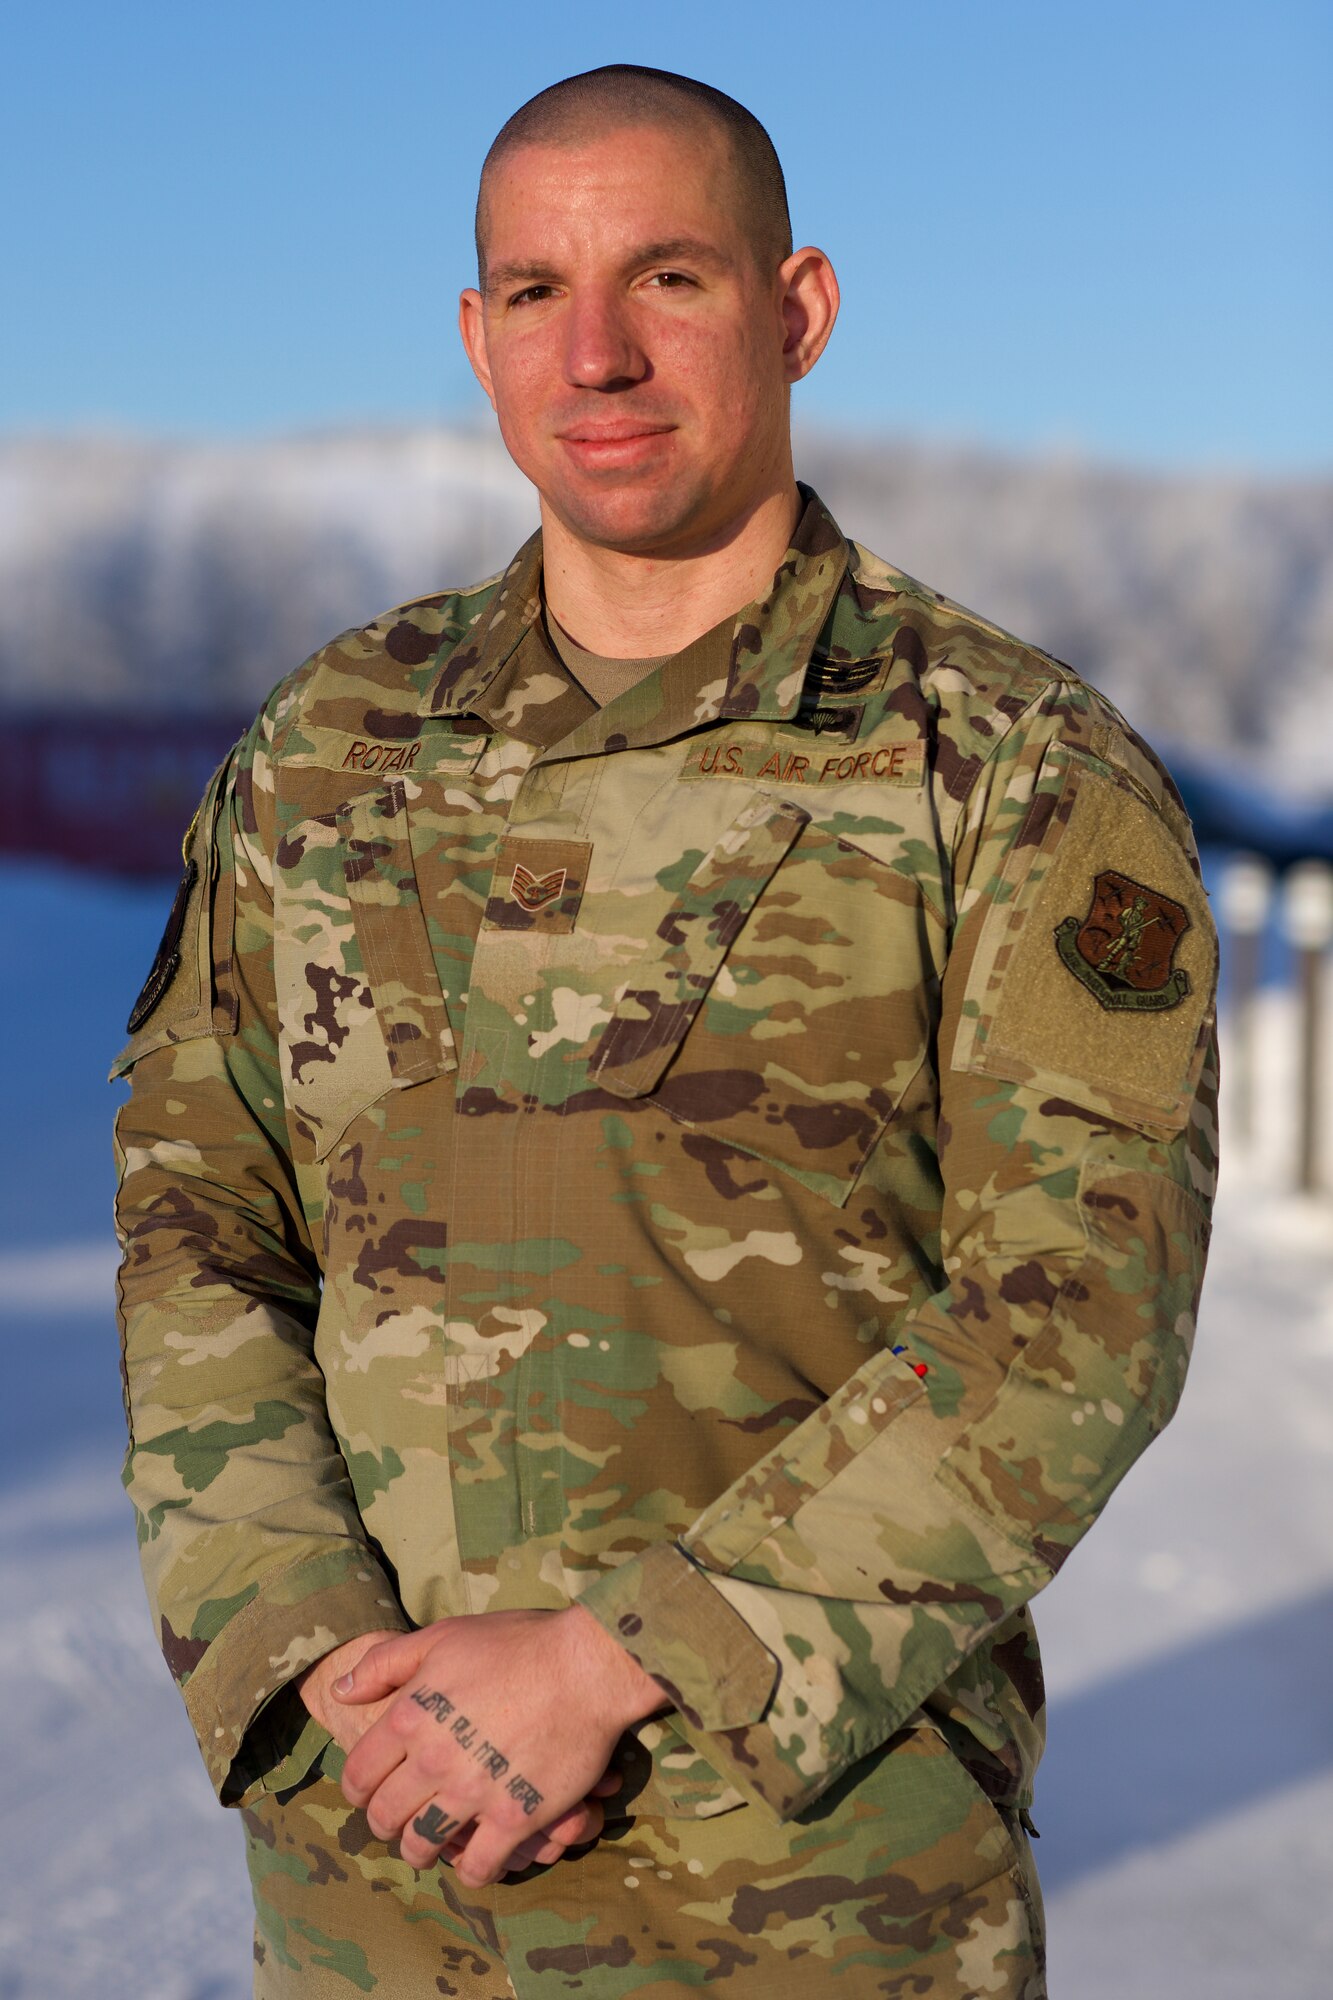 U.S. Air Force Staff Sgt. Joseph Rotar, an aircrew flight equipment specialist assigned to the 176th Operations Support Squadron, Alaska Air National Guard, poses for a photo at Joint Base Elmendorf-Richardson (JBER),  Alaska, Jan. 15. 2020.(U.S. Air National Guard photo by David Bedard)